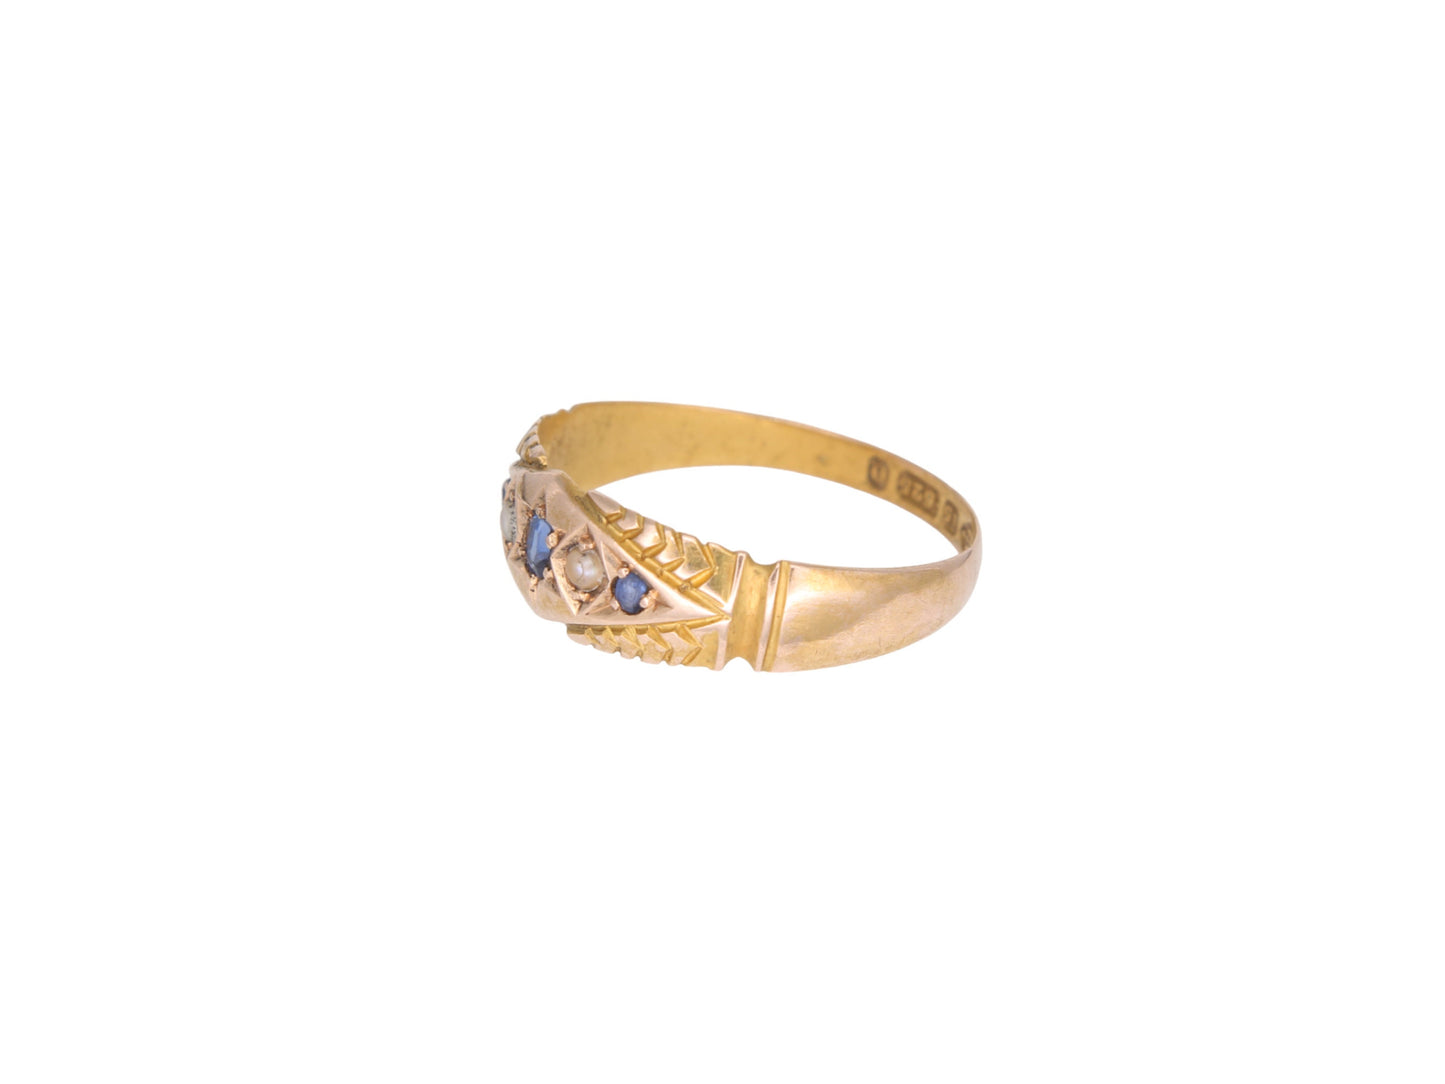 antique-15ct-sapphire-pearl-ring